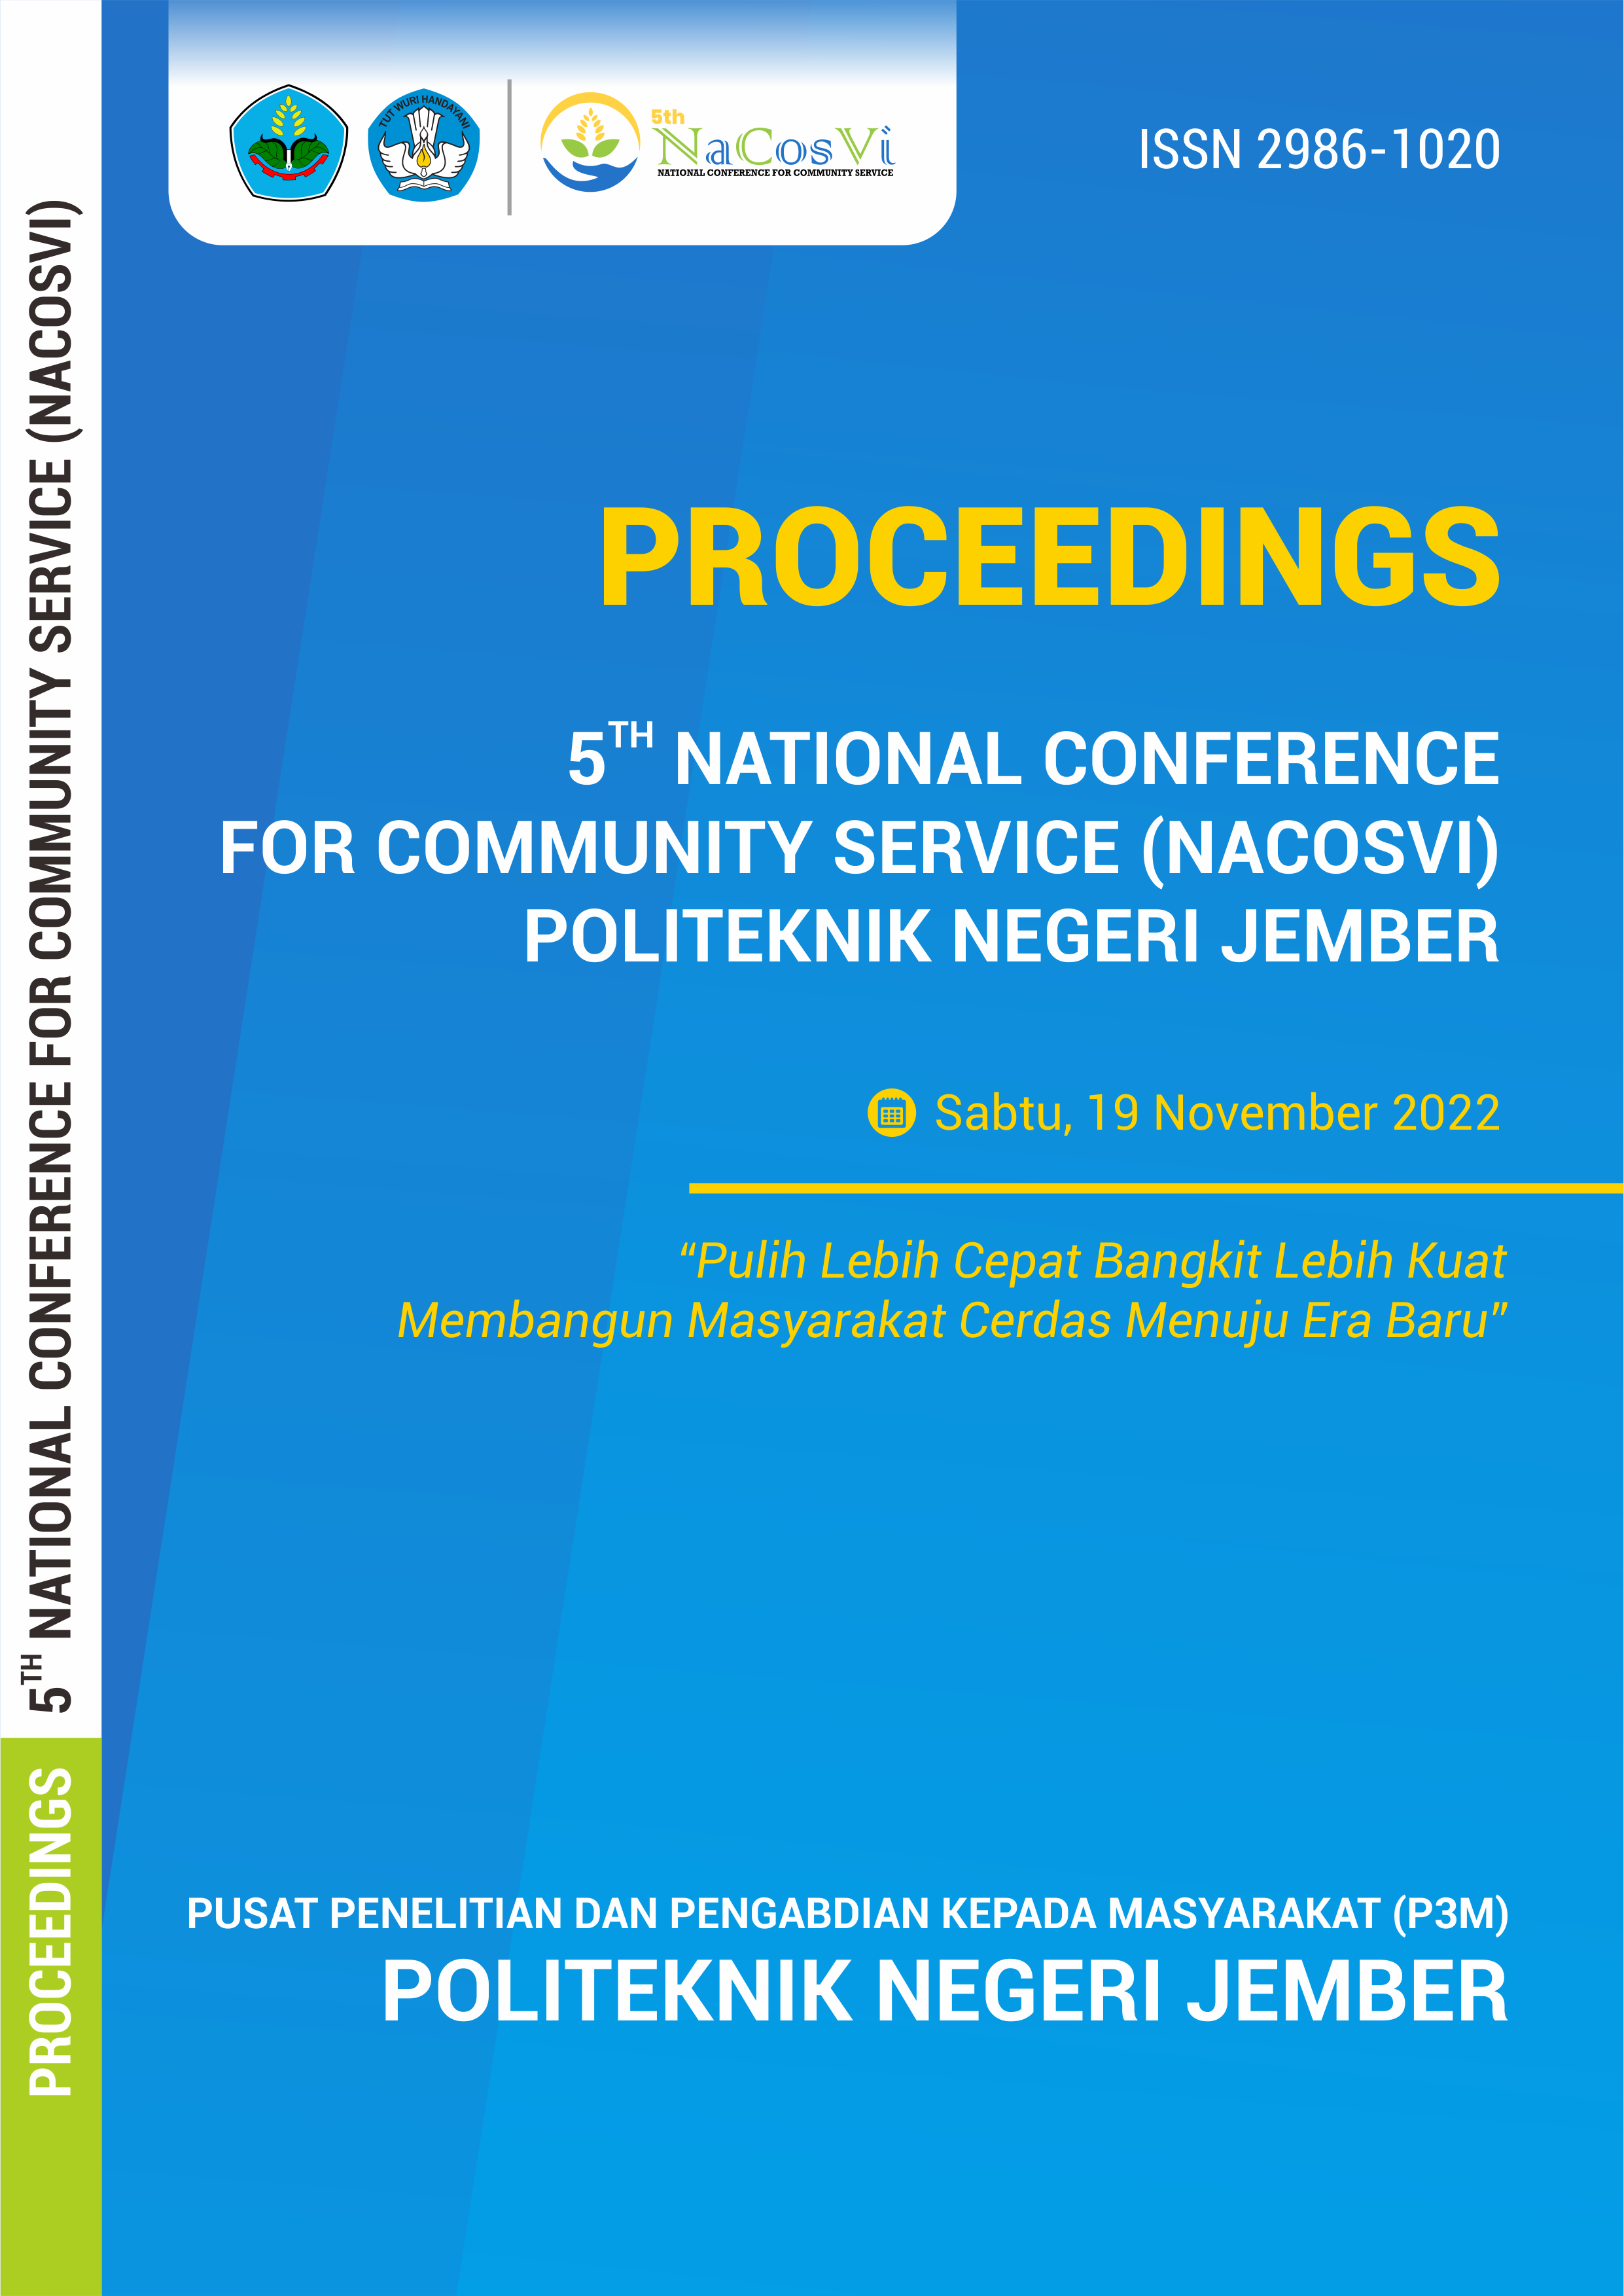 					View 5th National Conference for Community Service (NaCosVi)
				